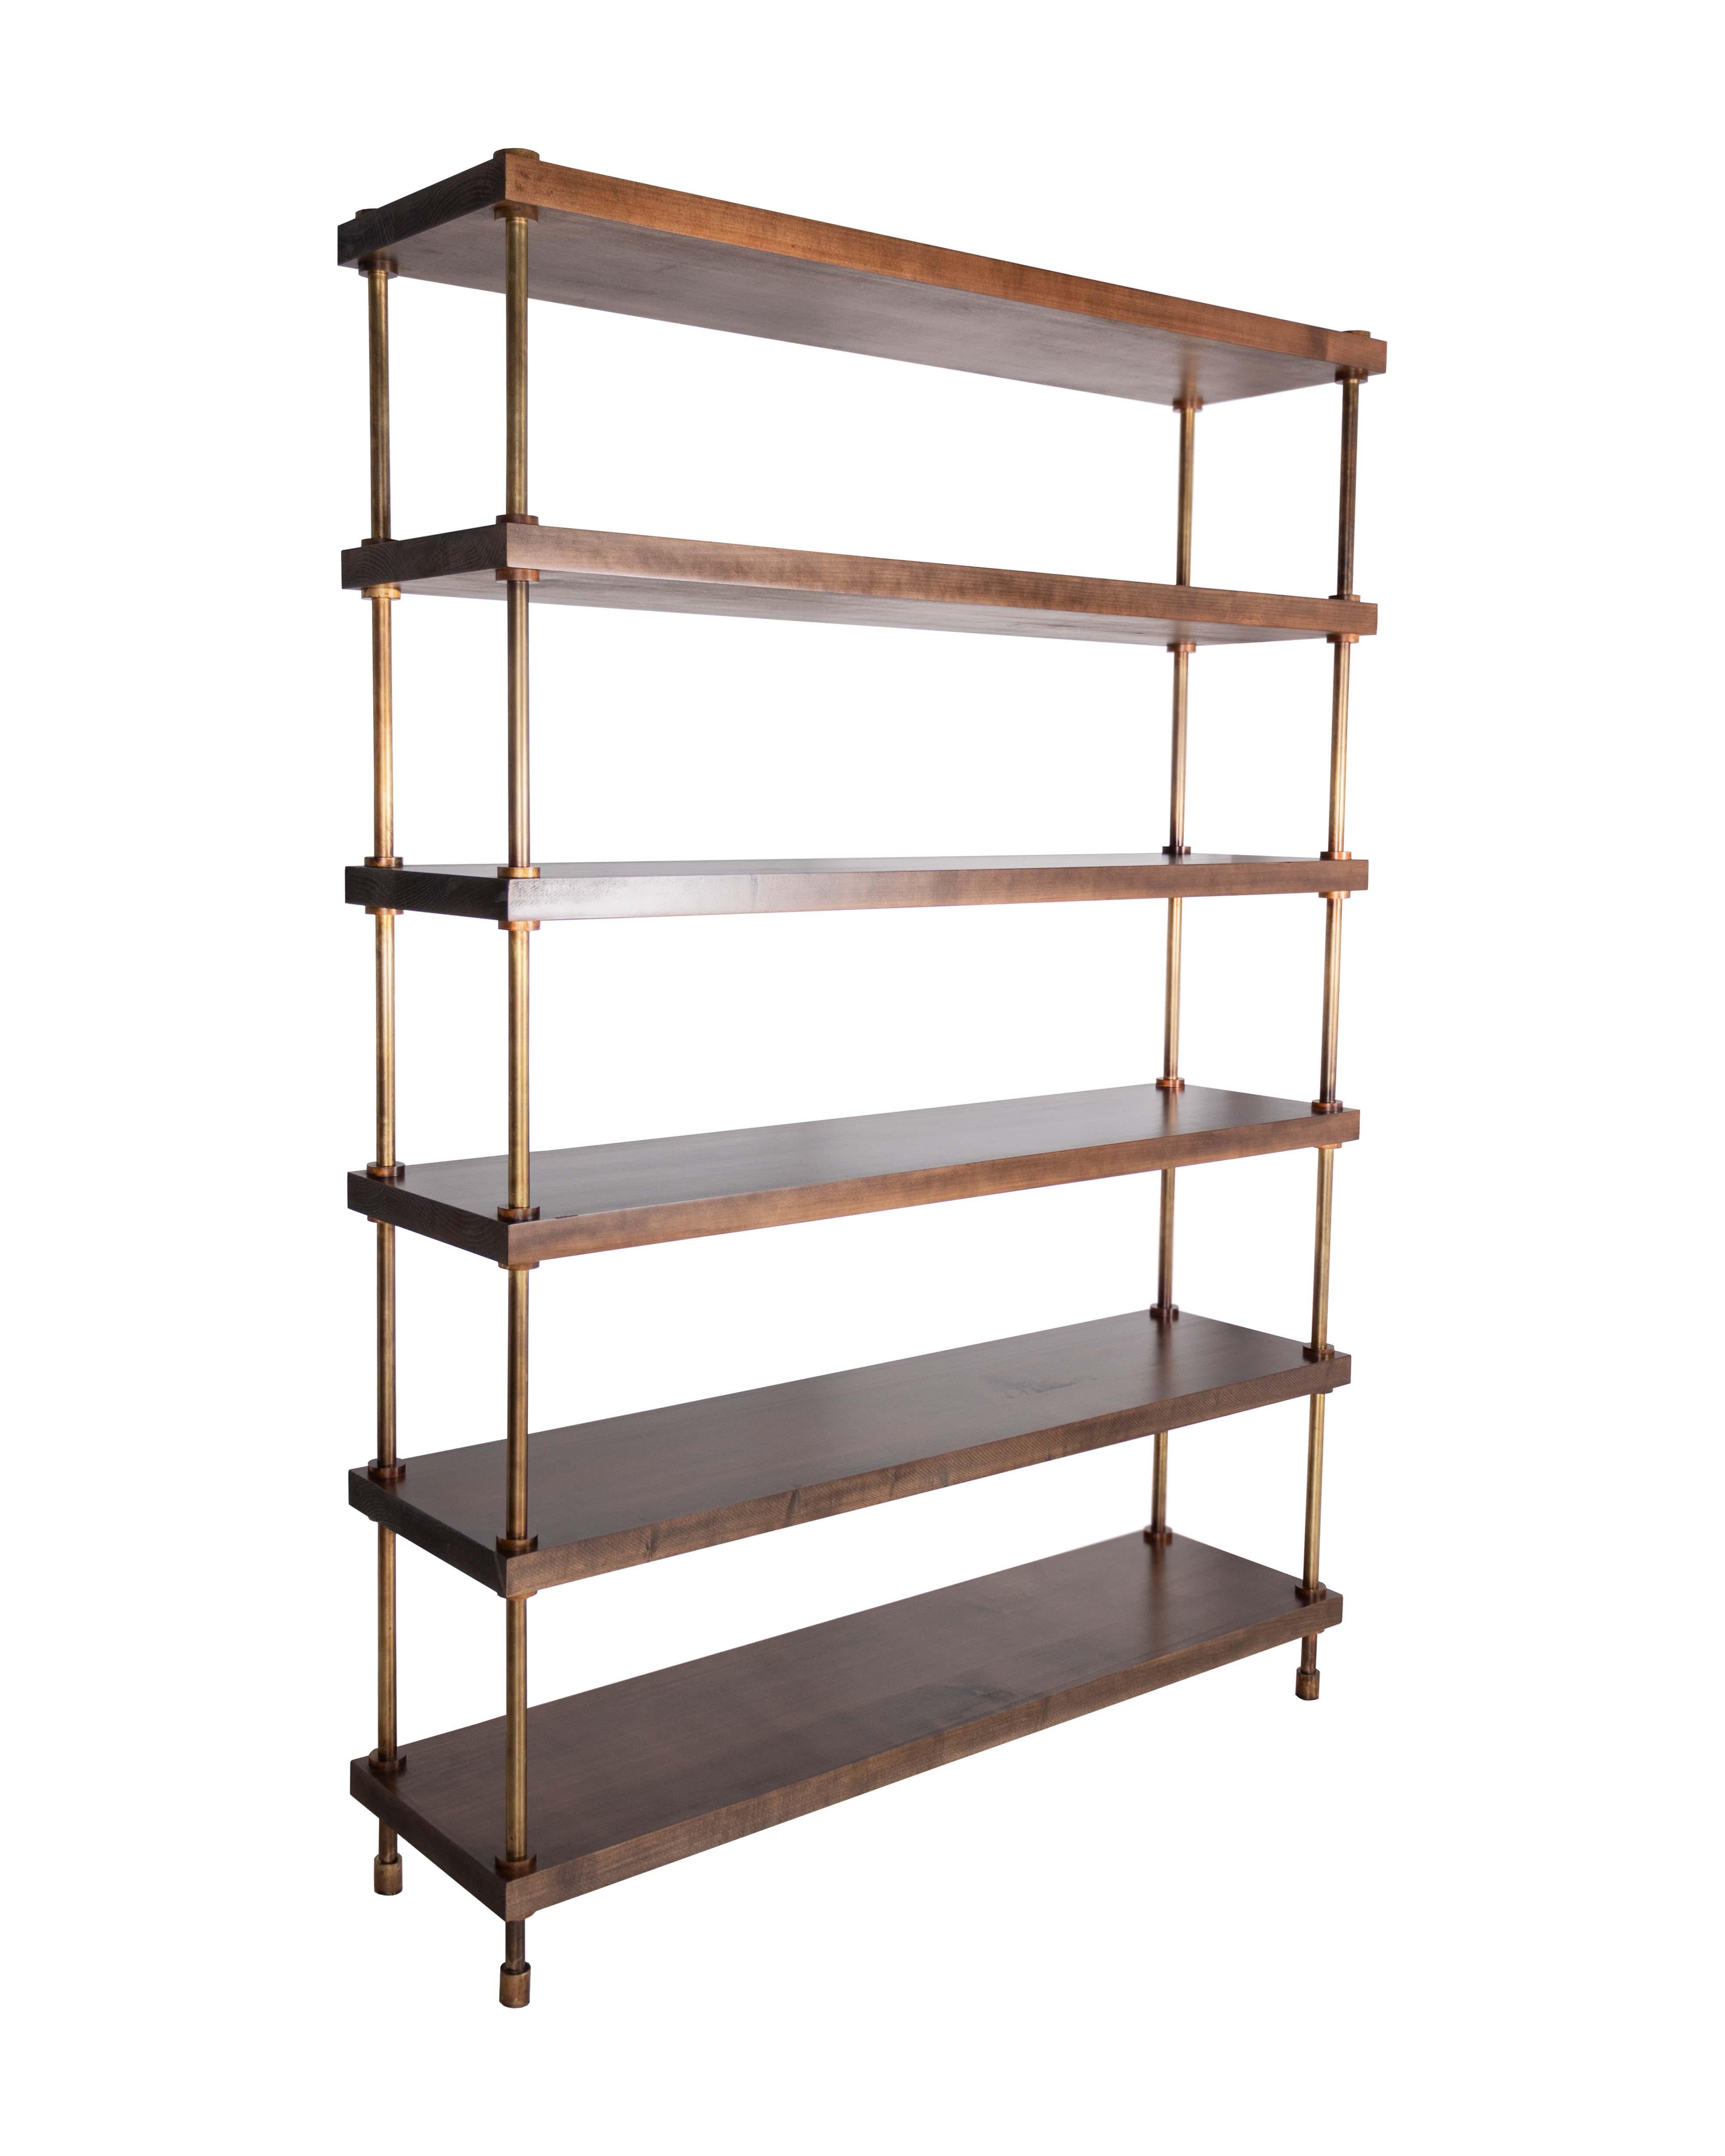 Custom modern bookshelf in a soft tawny finish on oak with brass accents. 

Designed by Brendan Bass for the Vision and Design Collection, by using high quality materials and textures. All materials are sourced from local vendors throughout the